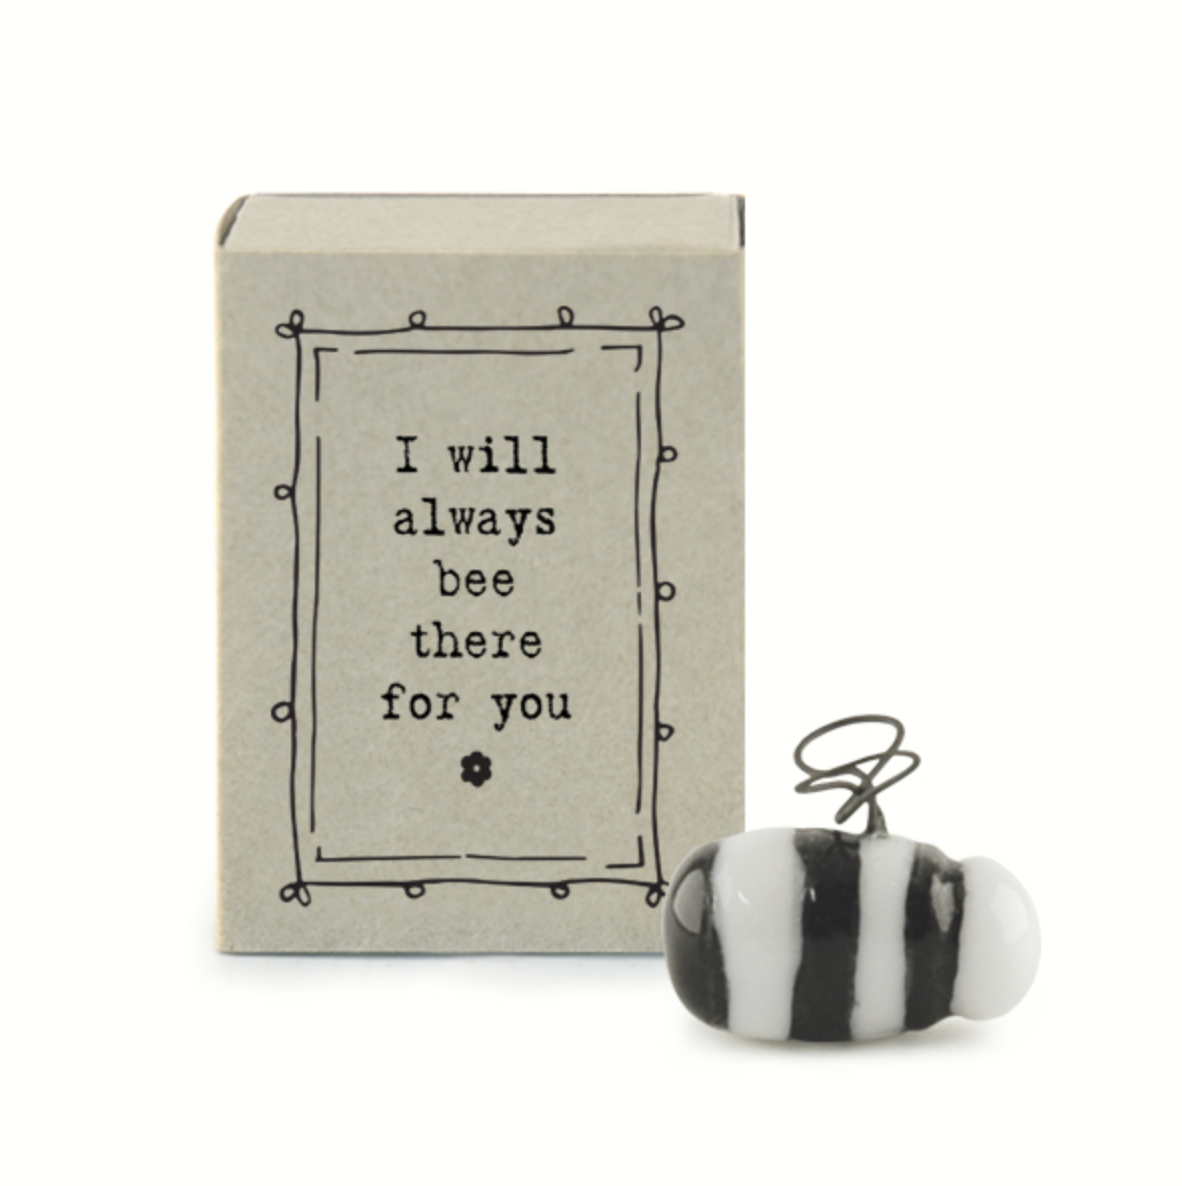 Kraft box saying 'I will always bee there fore you' with little black and white porcelain bumble bee with wire wings